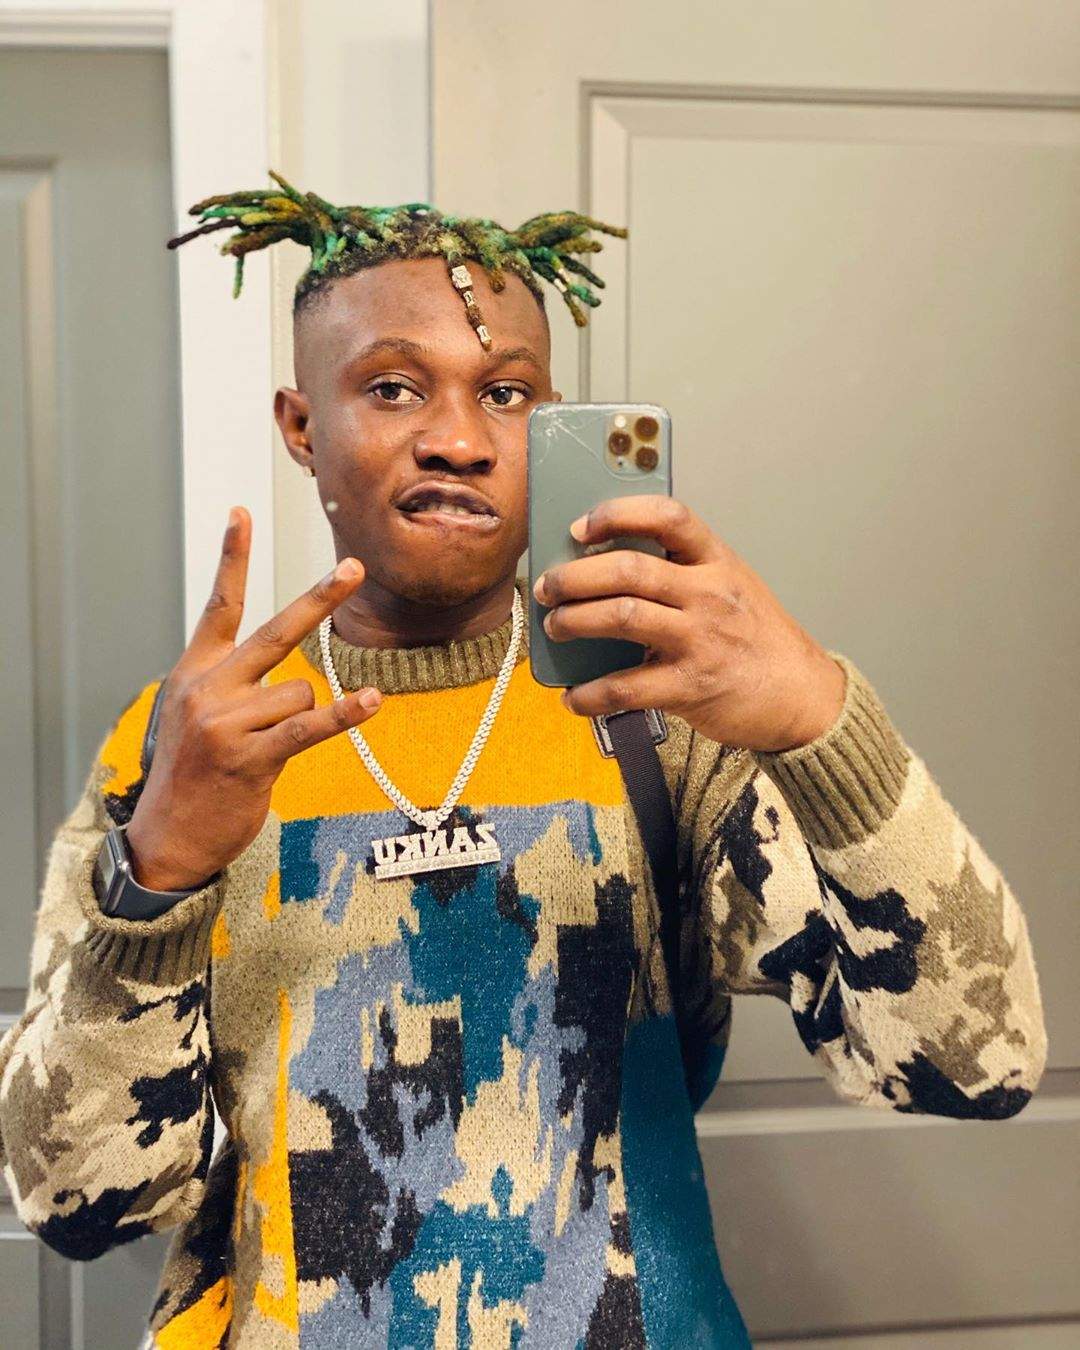 'If you didn't blow, you would be at Onitsha market selling jeans' - Zlatan Ibile tells Rema